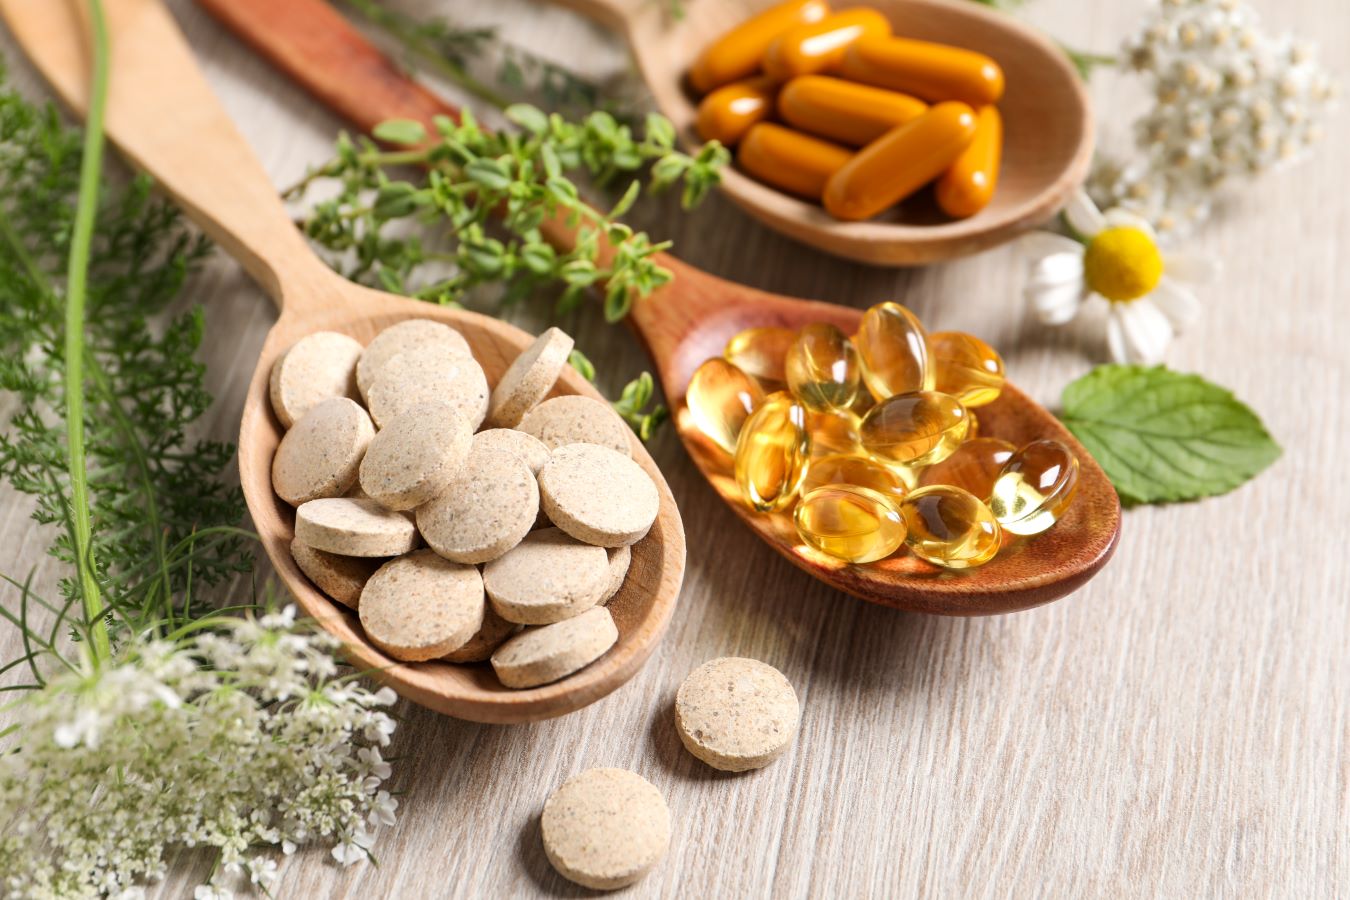 They seem to be all the rage lately, but how do you know if you need one? Here are four reasons to consider a dietary supplement.